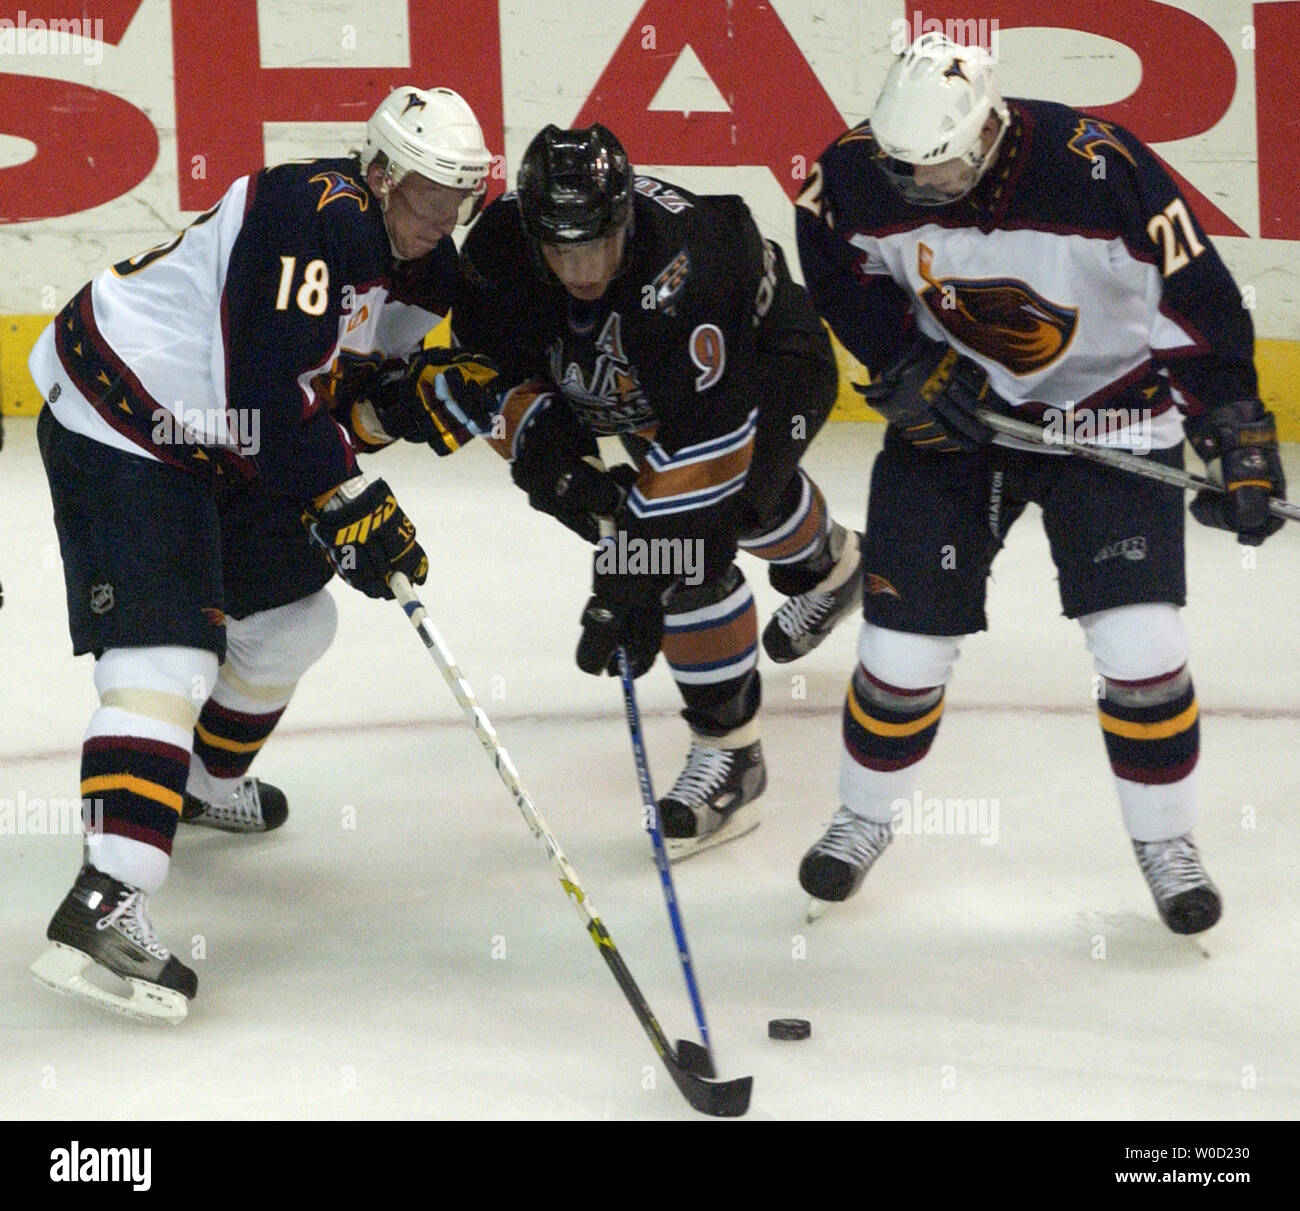 Washington Capitals Daninius Zubrus (9)  carries the puck against Atlanta Thrashers Marian Hossa (18) and Patrik Stefan (27), during the second period at the Verizon Center in Washington on April 17, 2006. The Capitals defeated the Thrashers 6-4. (UPI Photo/Kevin Dietsch) Stock Photo